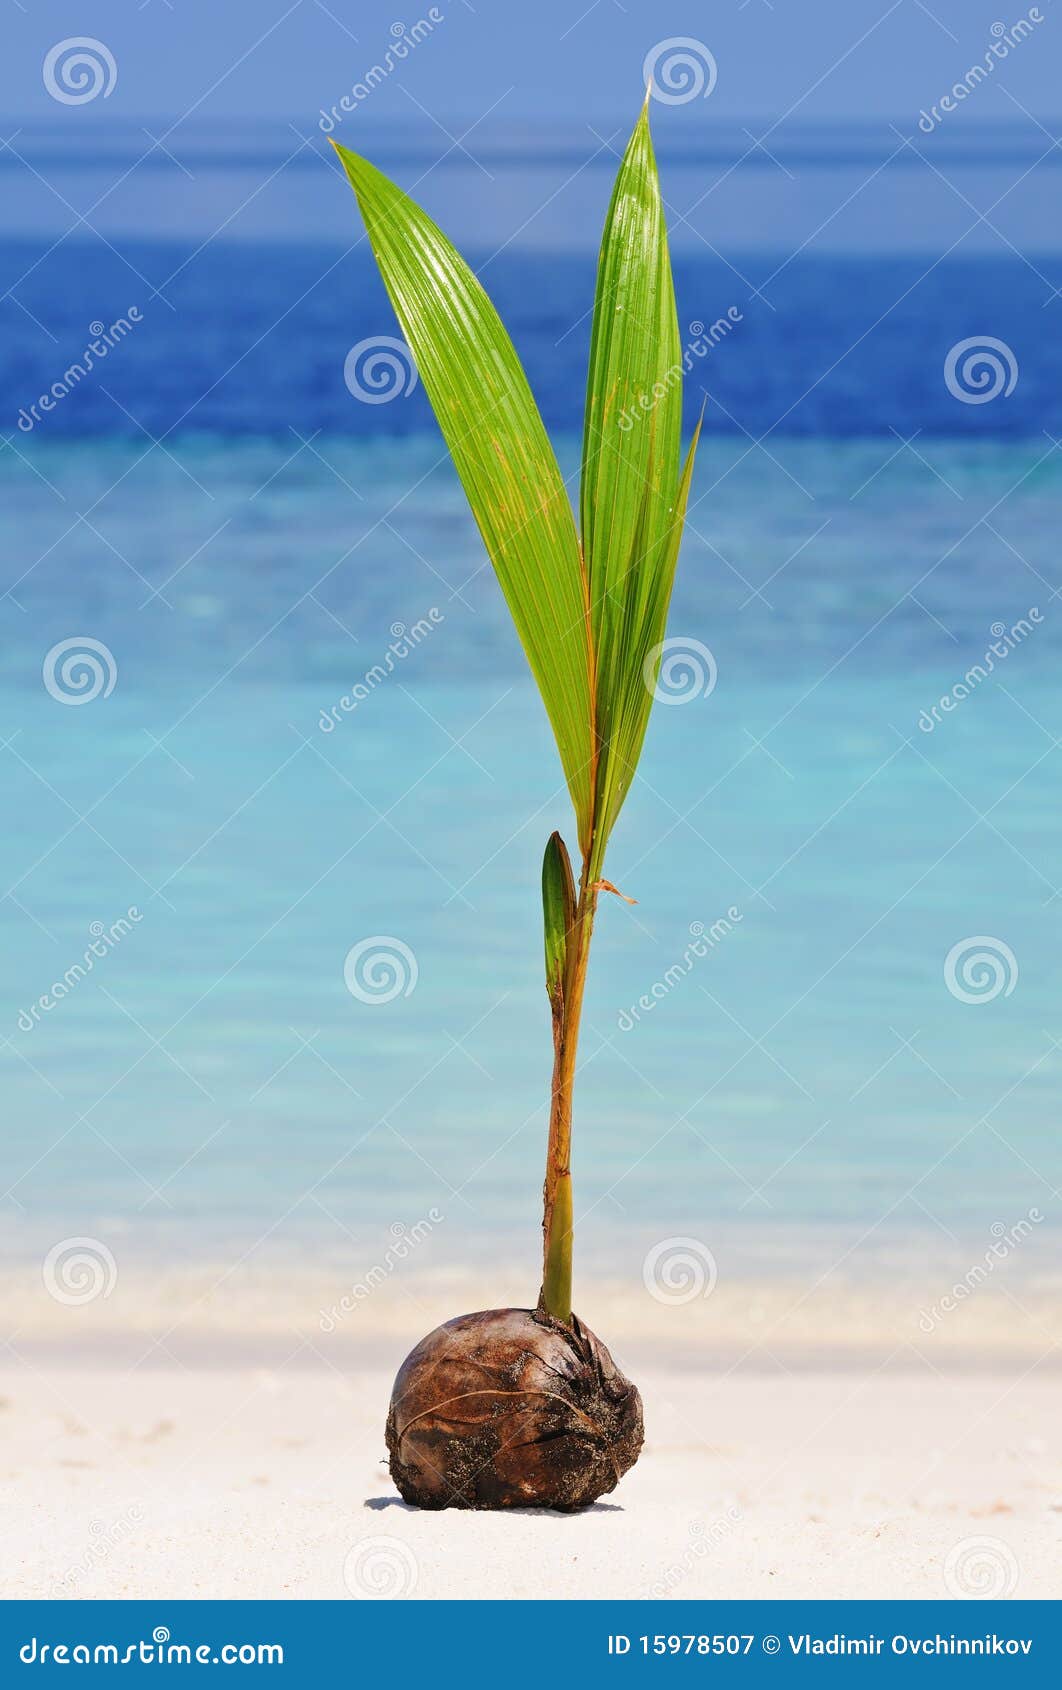 Coconut sprout stock image. Image of sunlight, life, green - 15978507